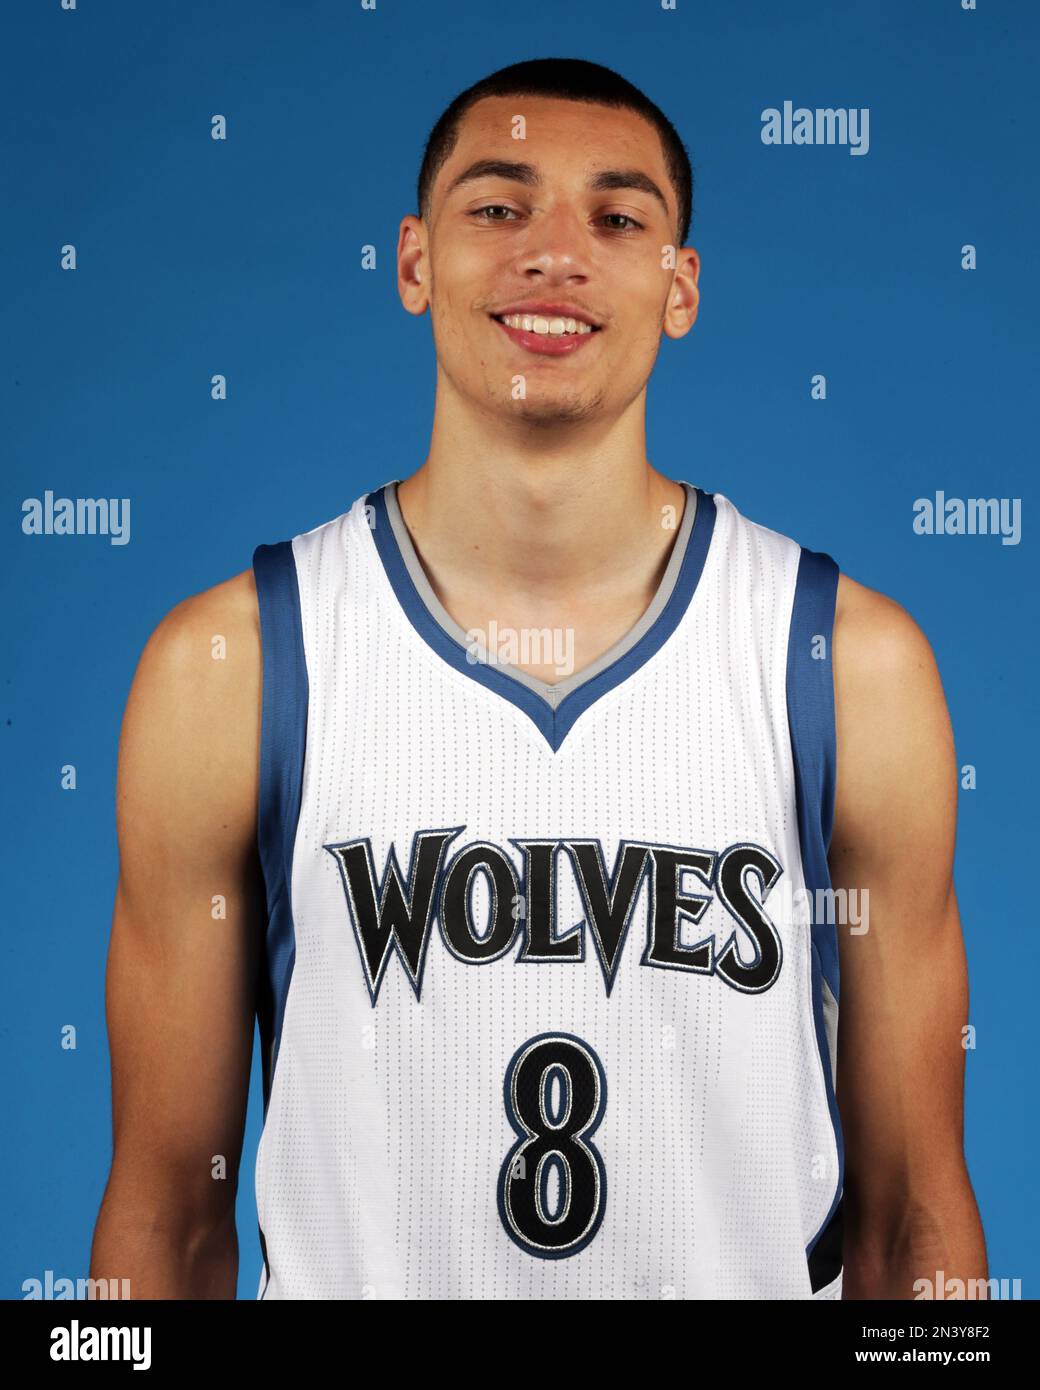 UCLA's Zach LaVine Drafted 13th Overall By The Timberwolves